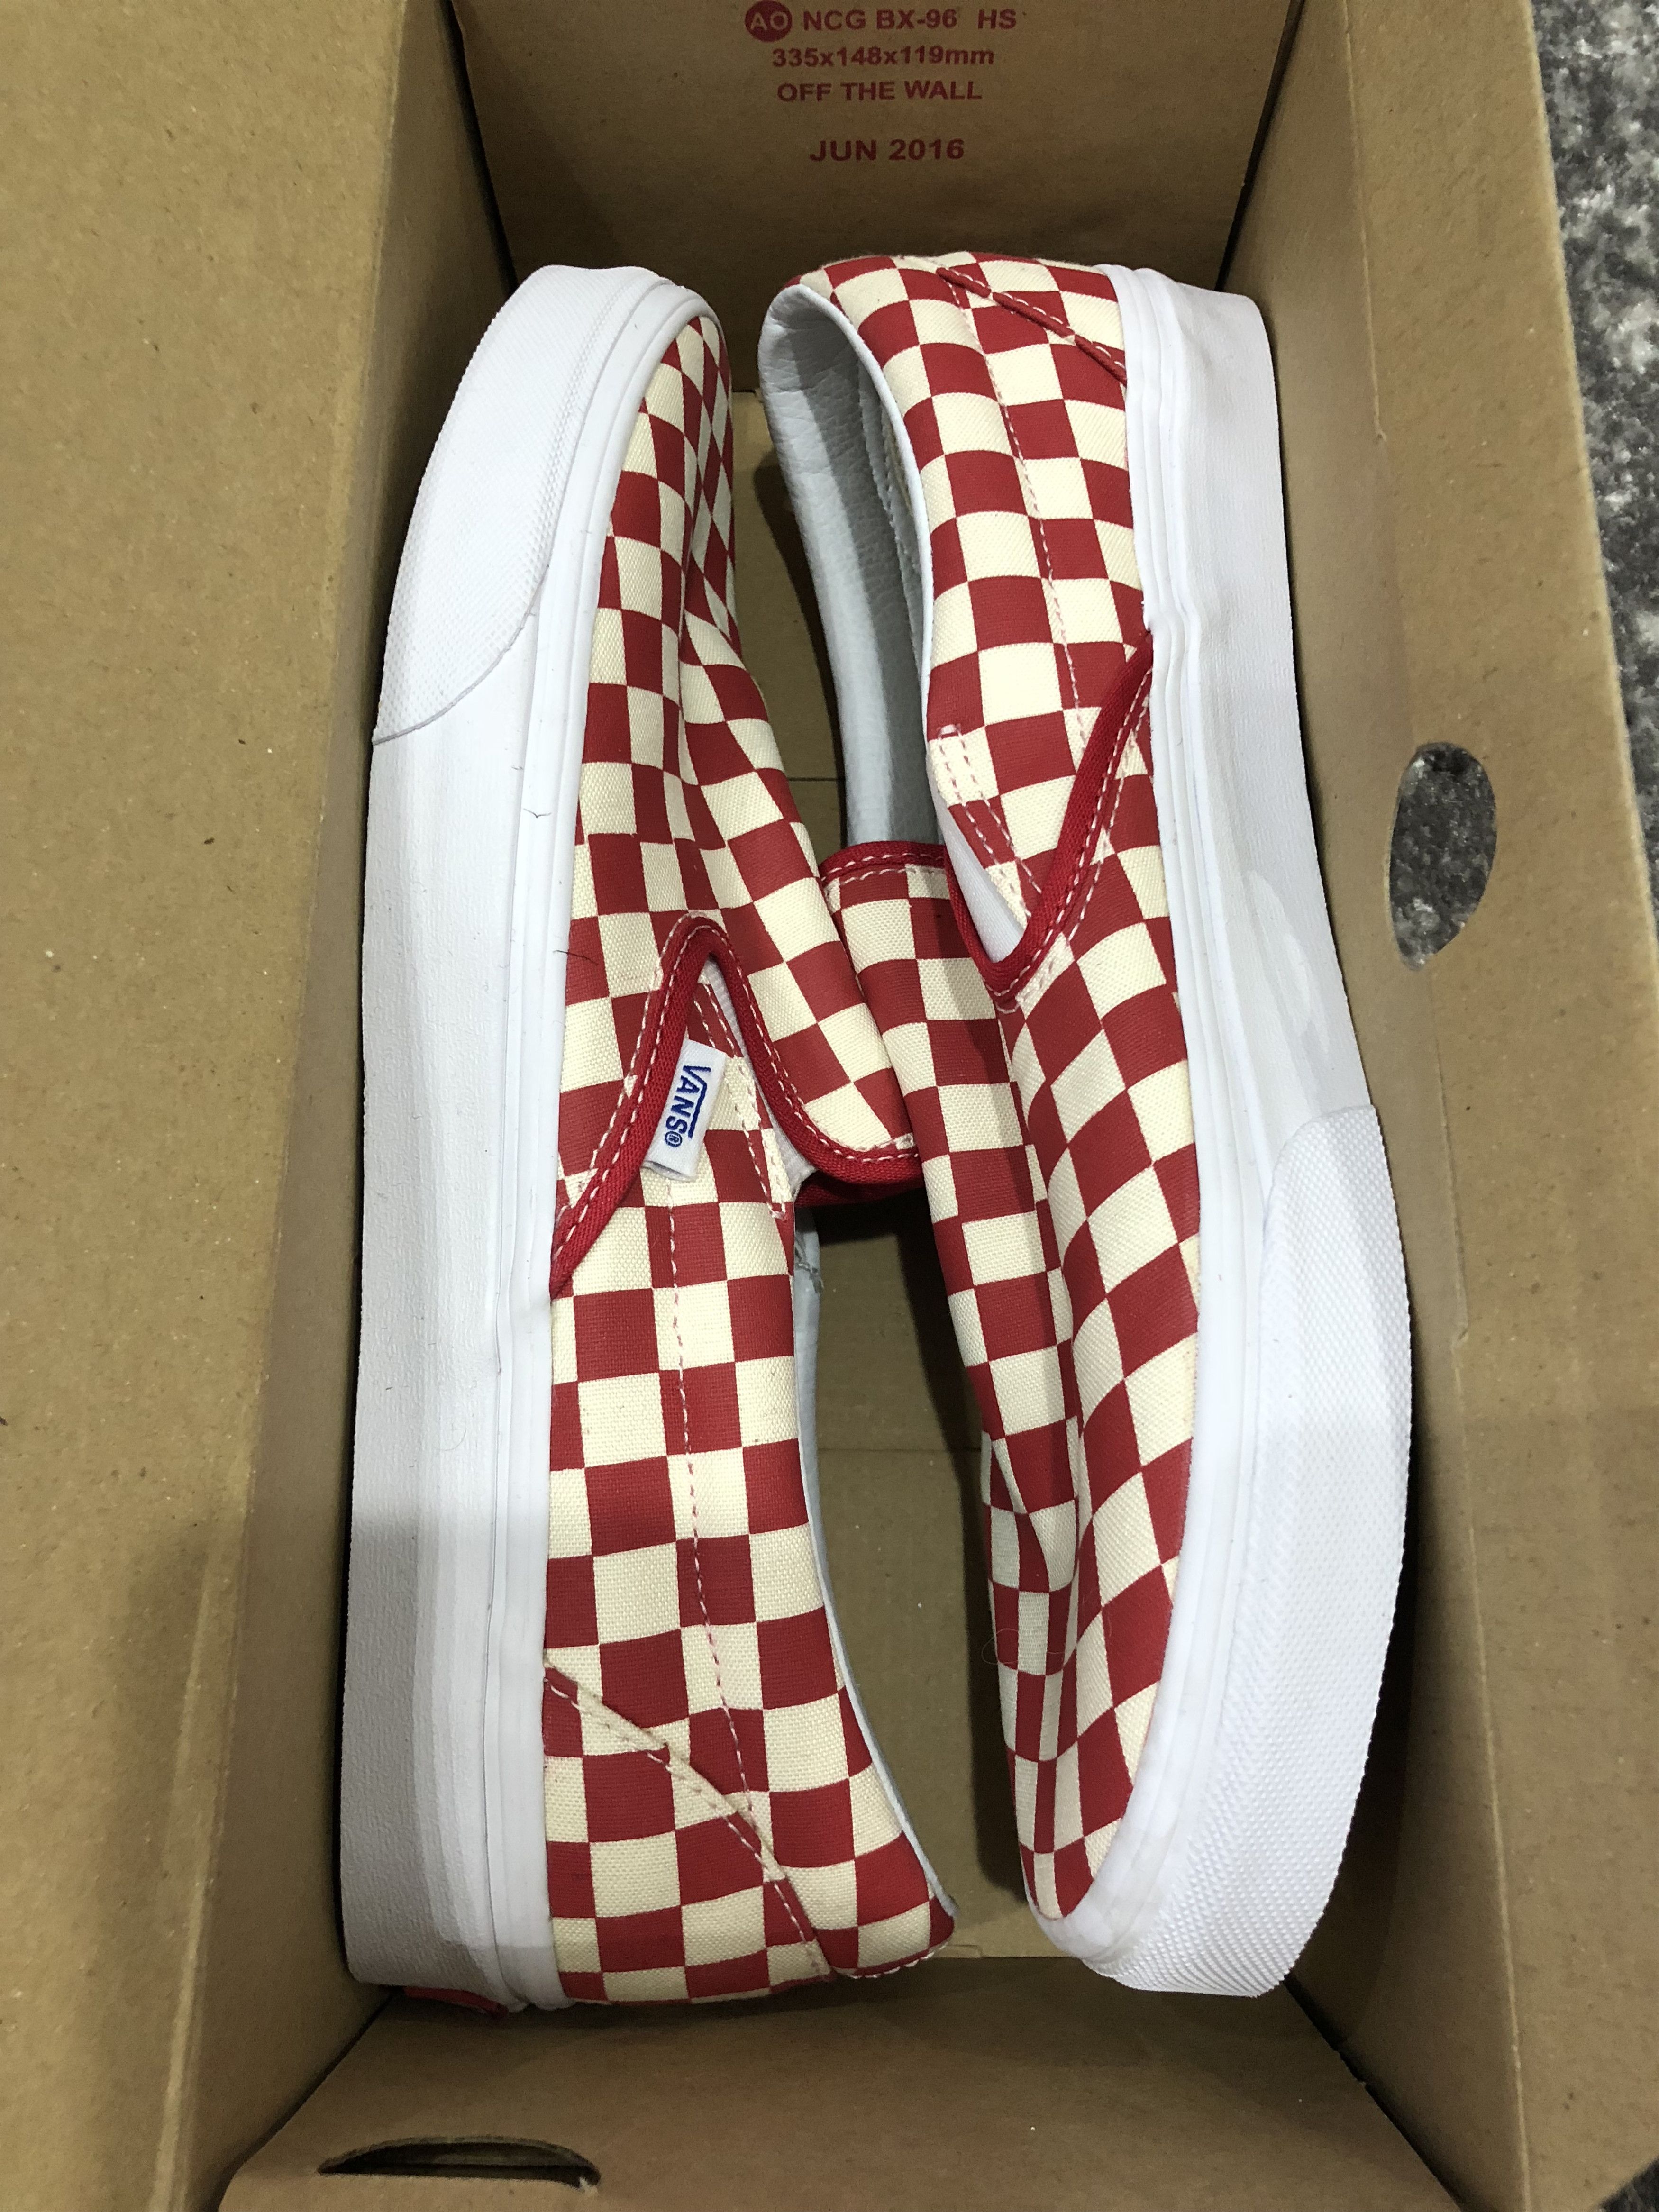 Vans Red Checkerboard Slip Ons Size US 10.5 / EU 43-44 - 3 Preview